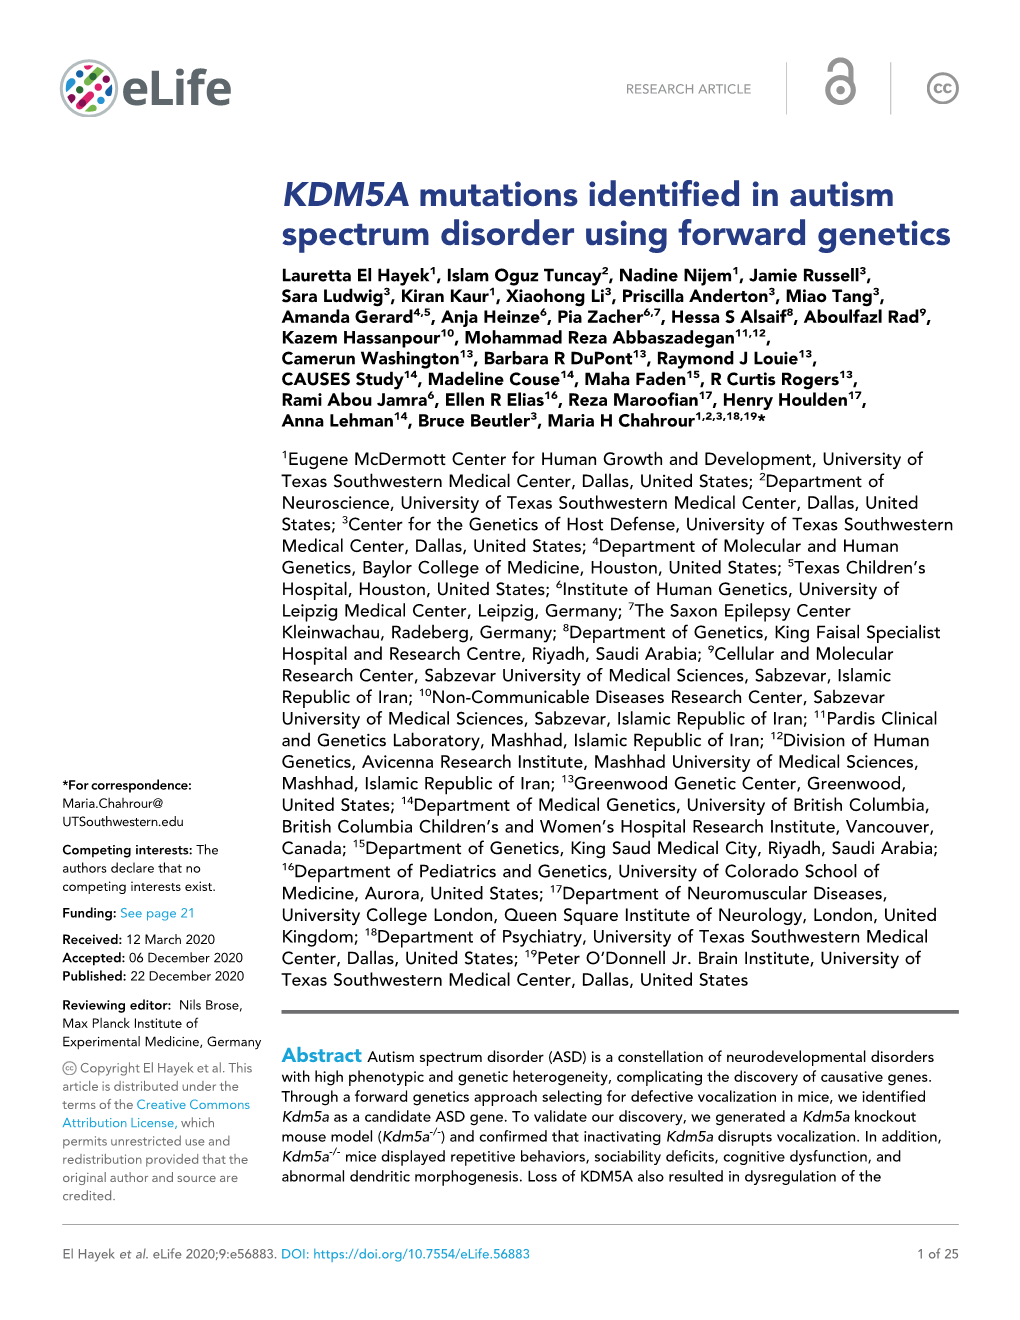 KDM5A Mutations Identified in Autism Spectrum Disorder Using Forward